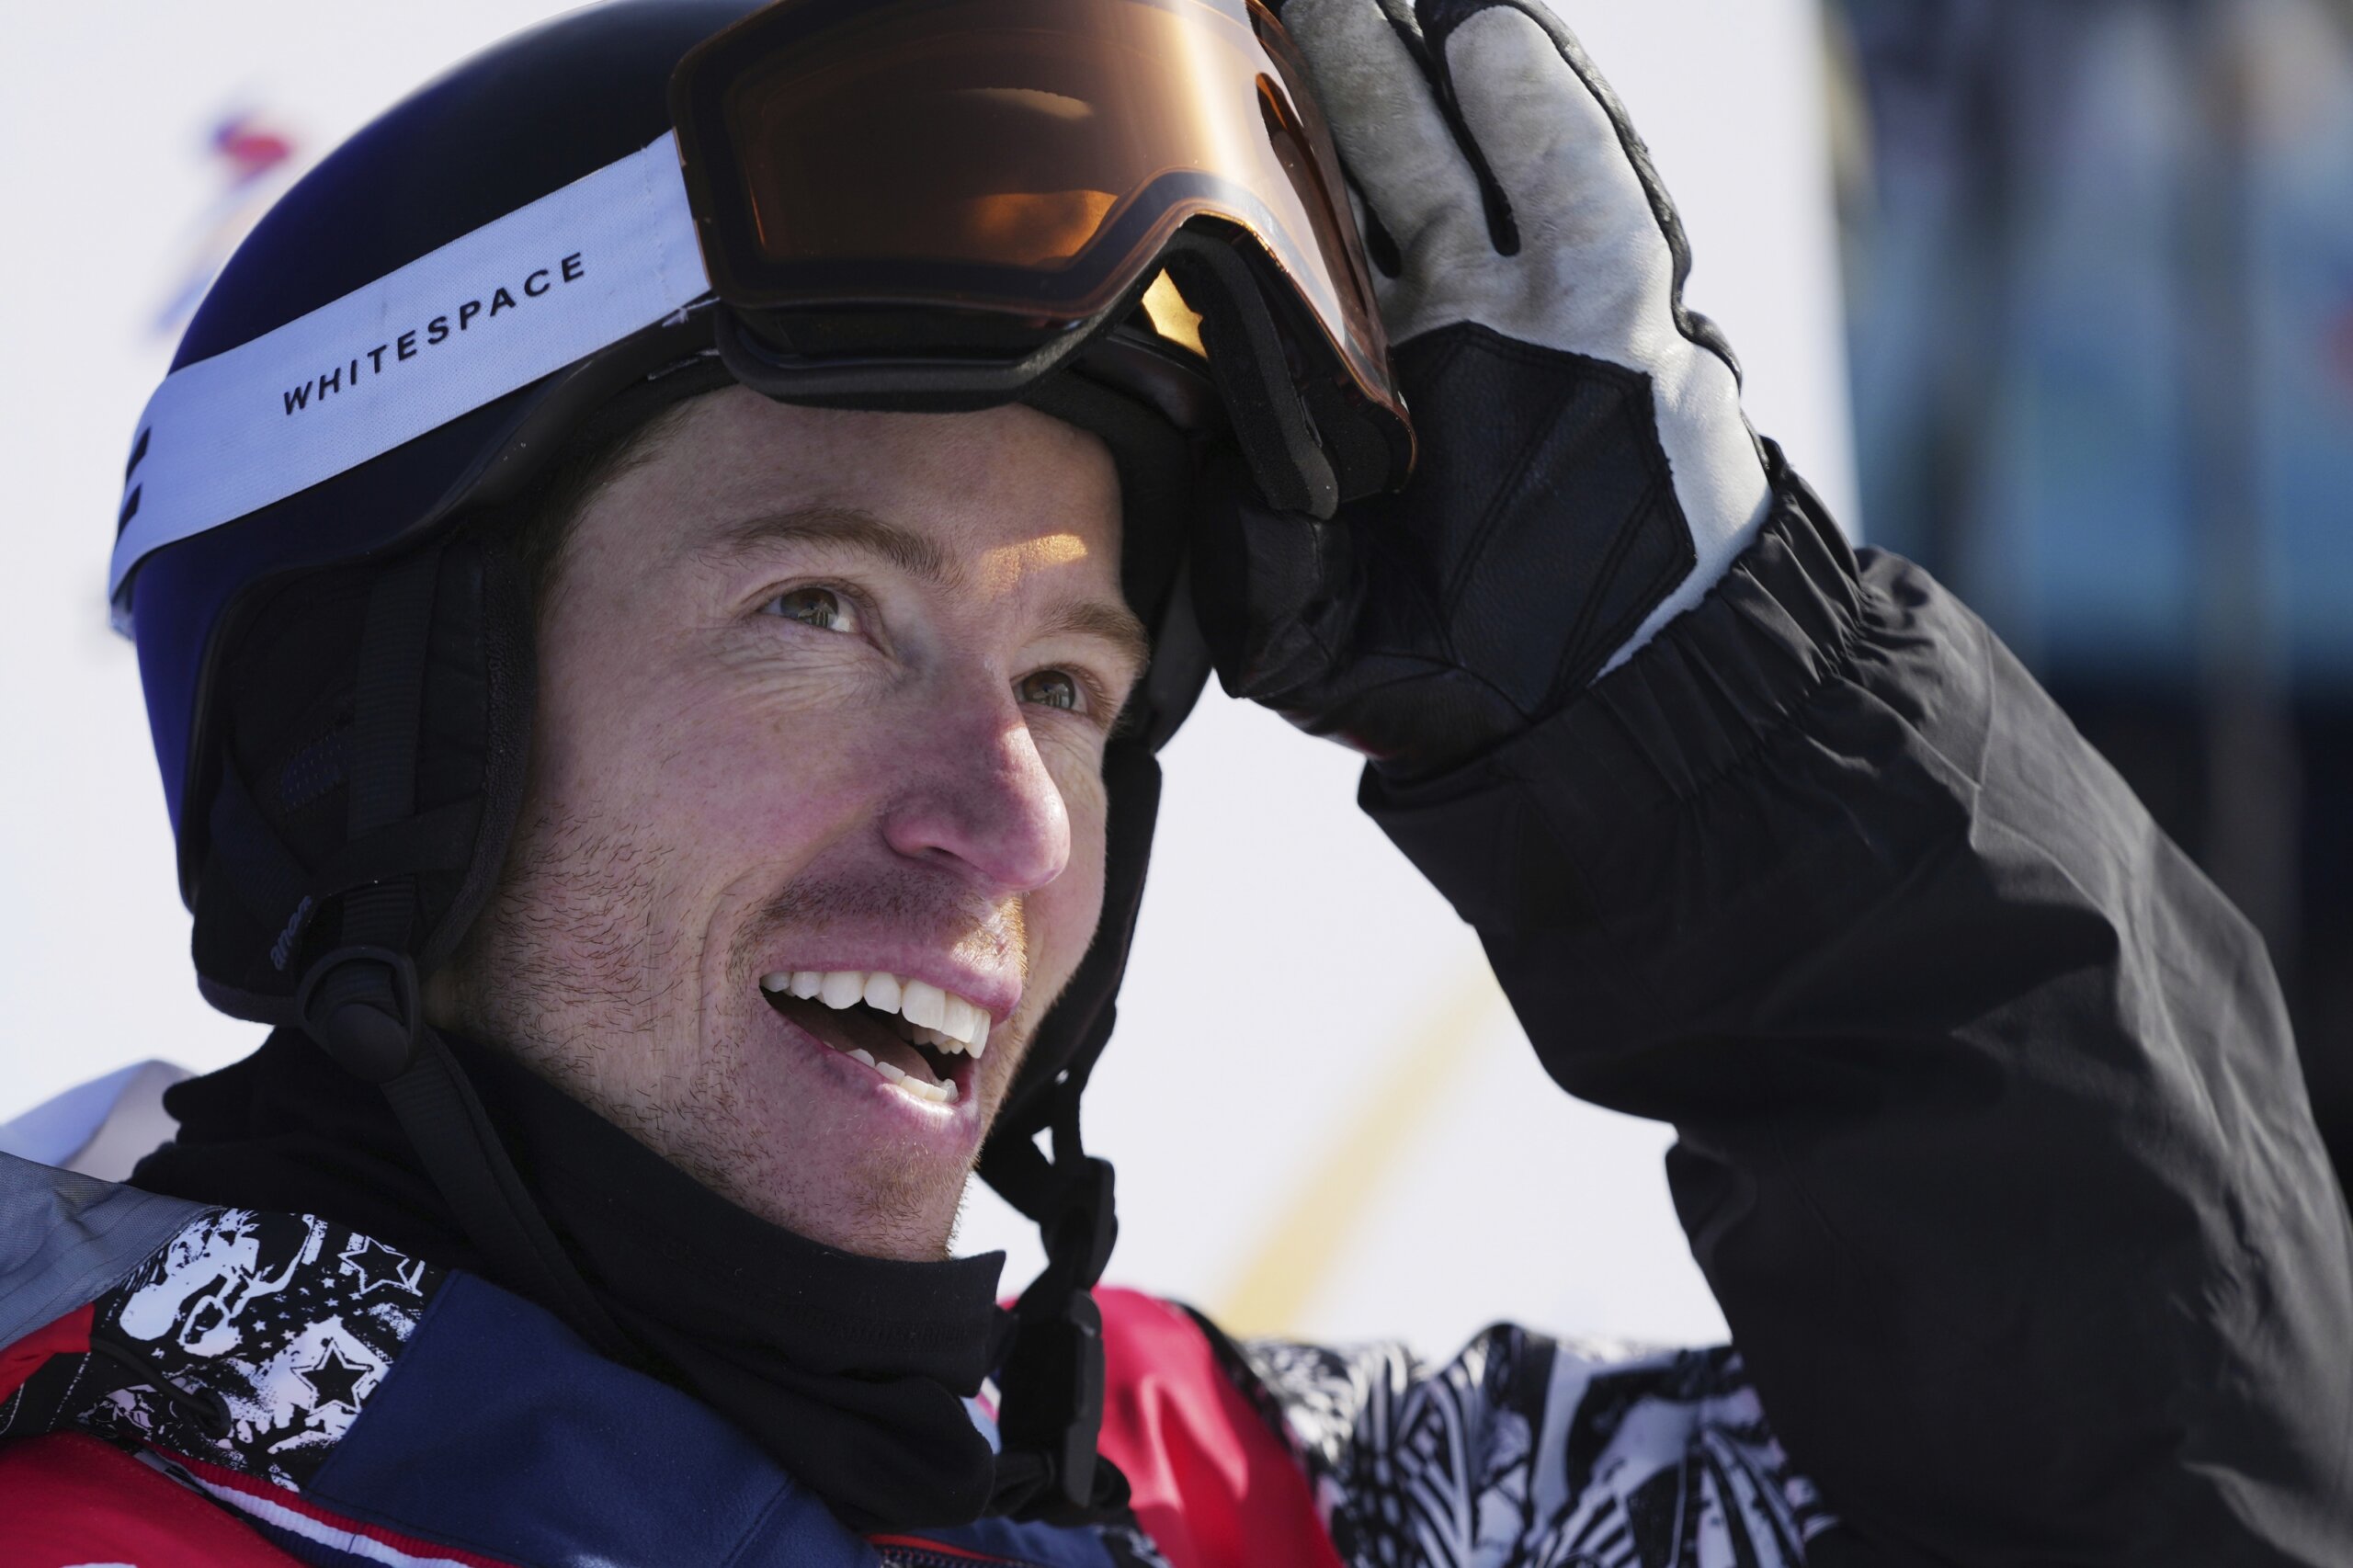 Shaun White winds up 4th at final Olympics, closing out extraordinary career